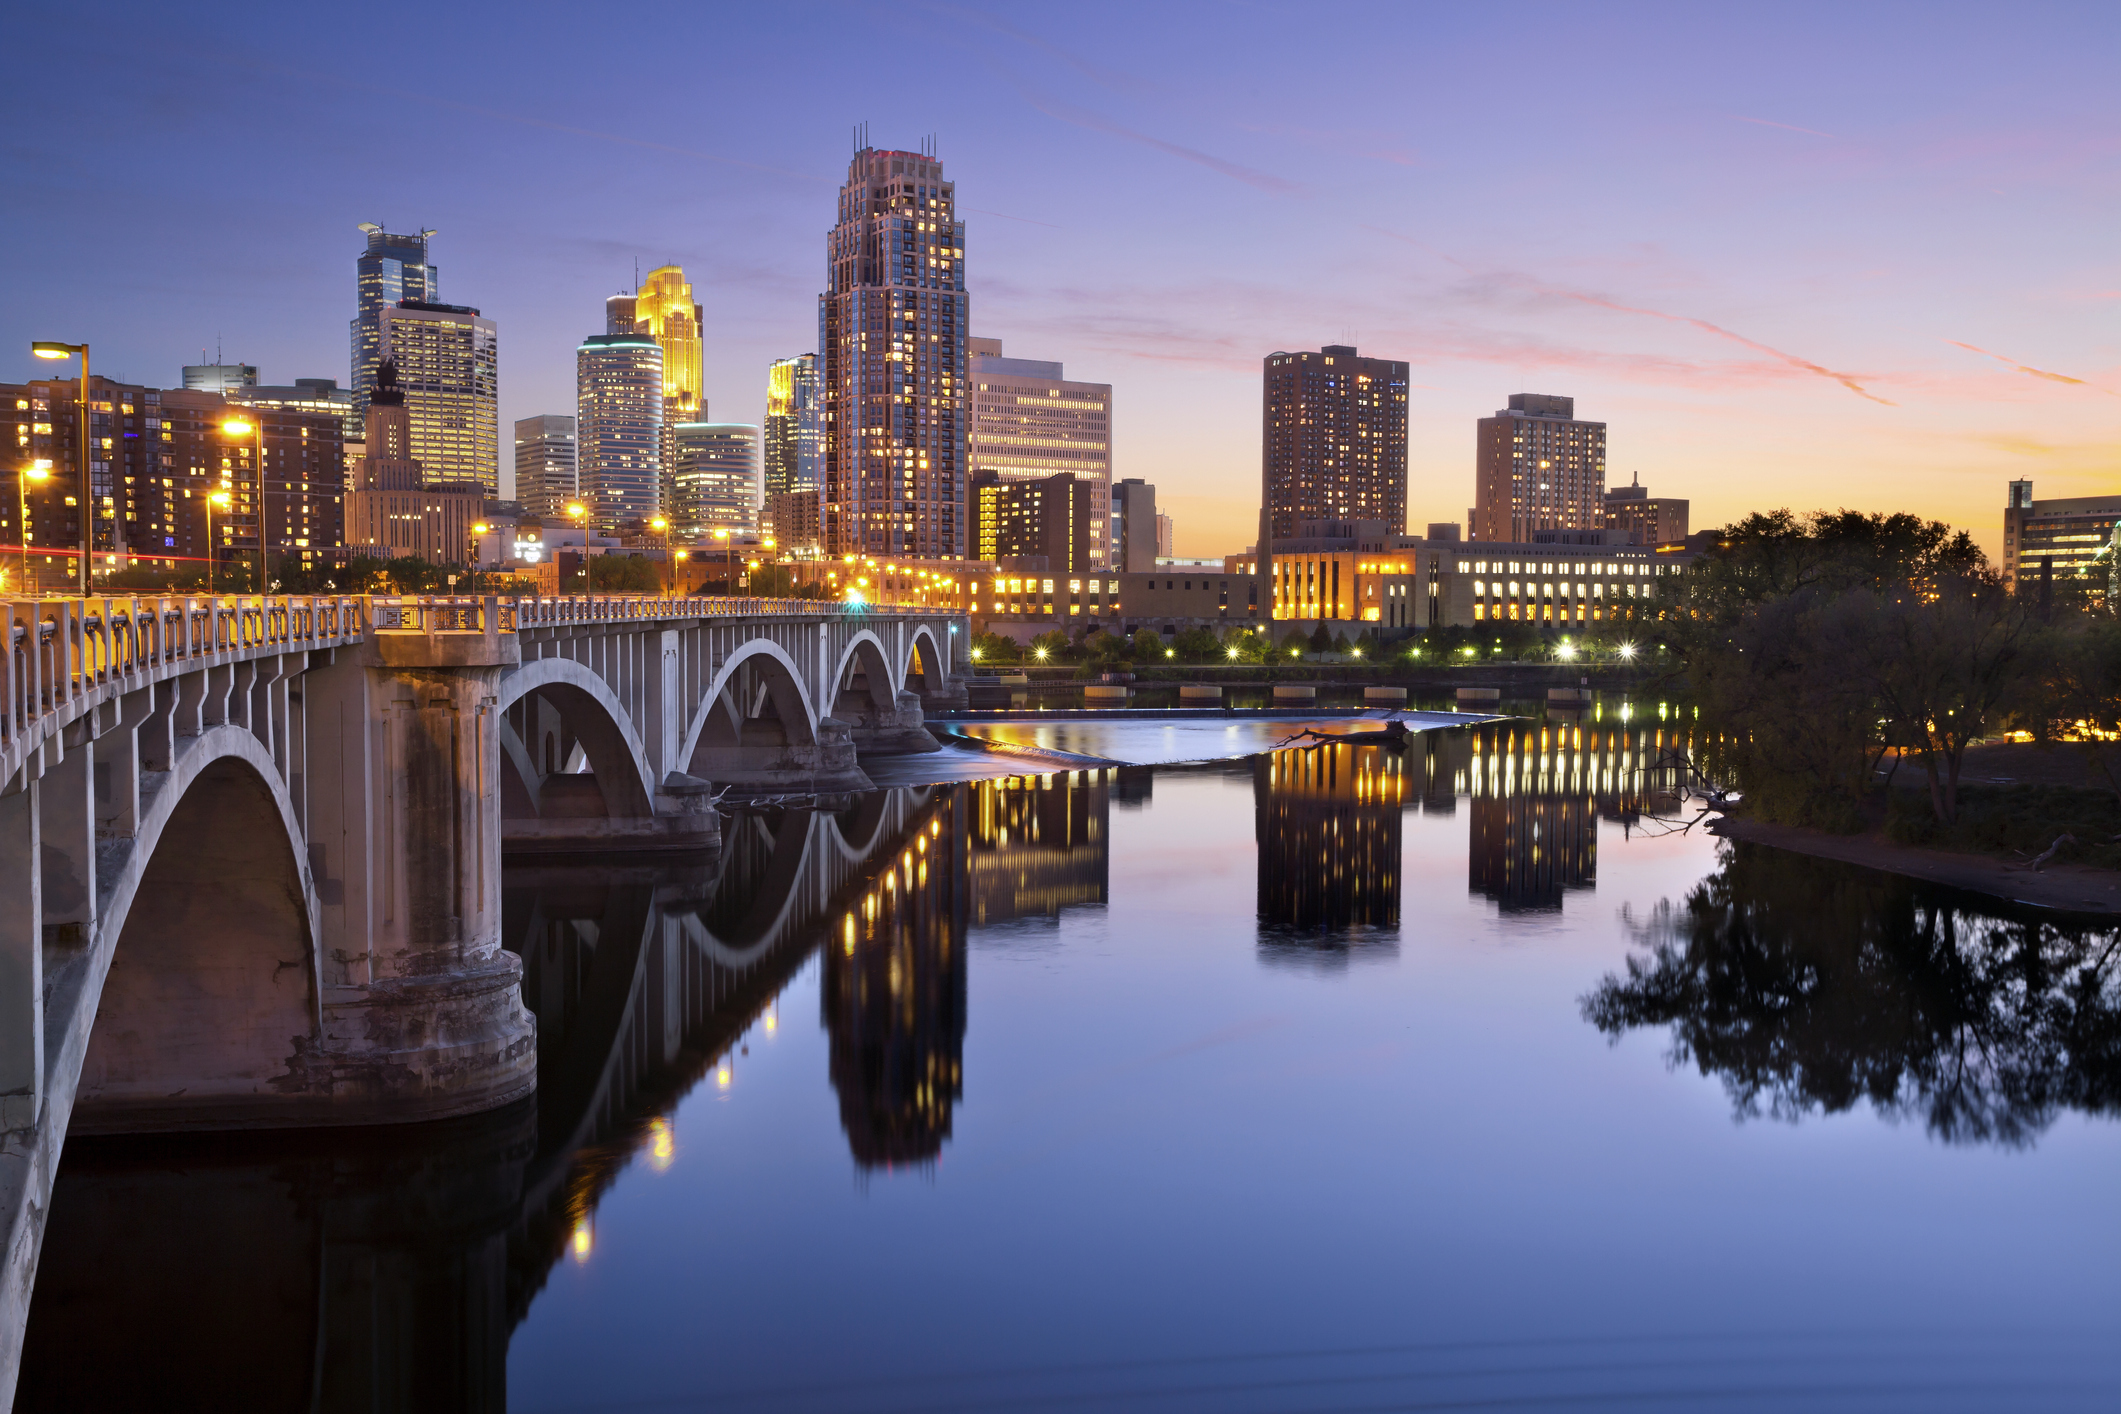 Midwest Region Most Popular Among Renters